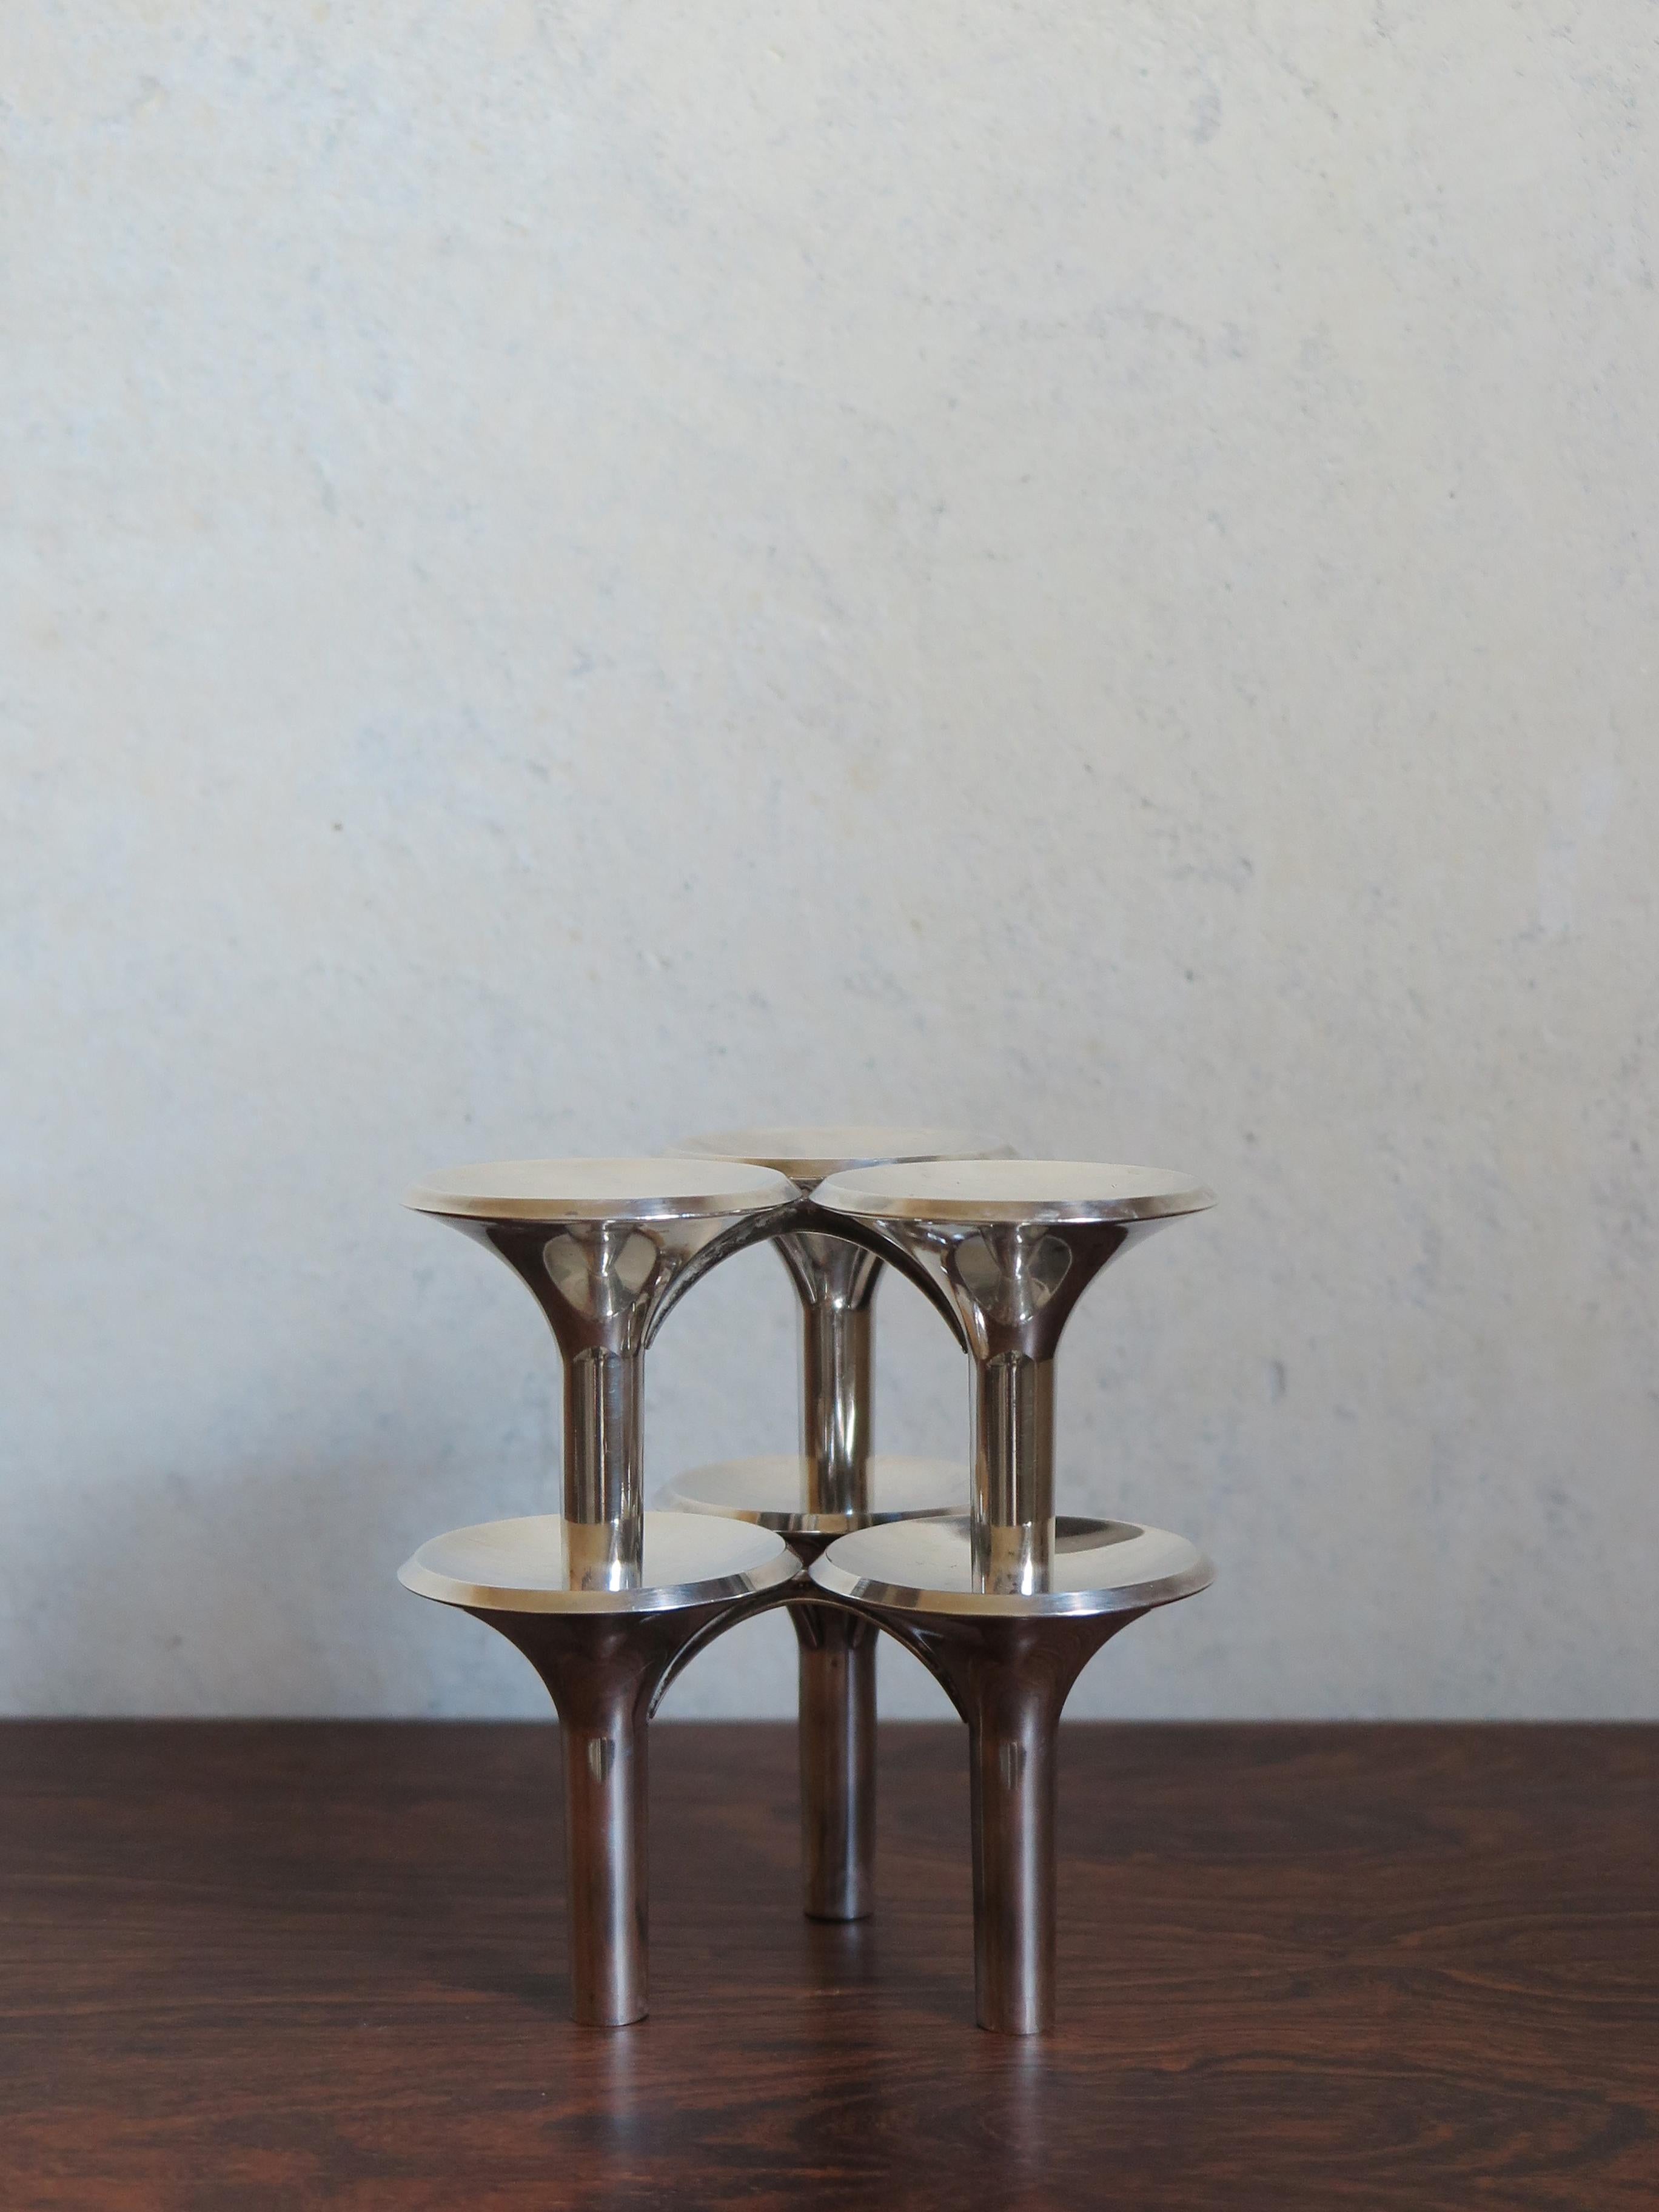 German Ceasar Stoffi e Fritz Nagel Candleholders for BMF in Chromed Metal, 1960s For Sale